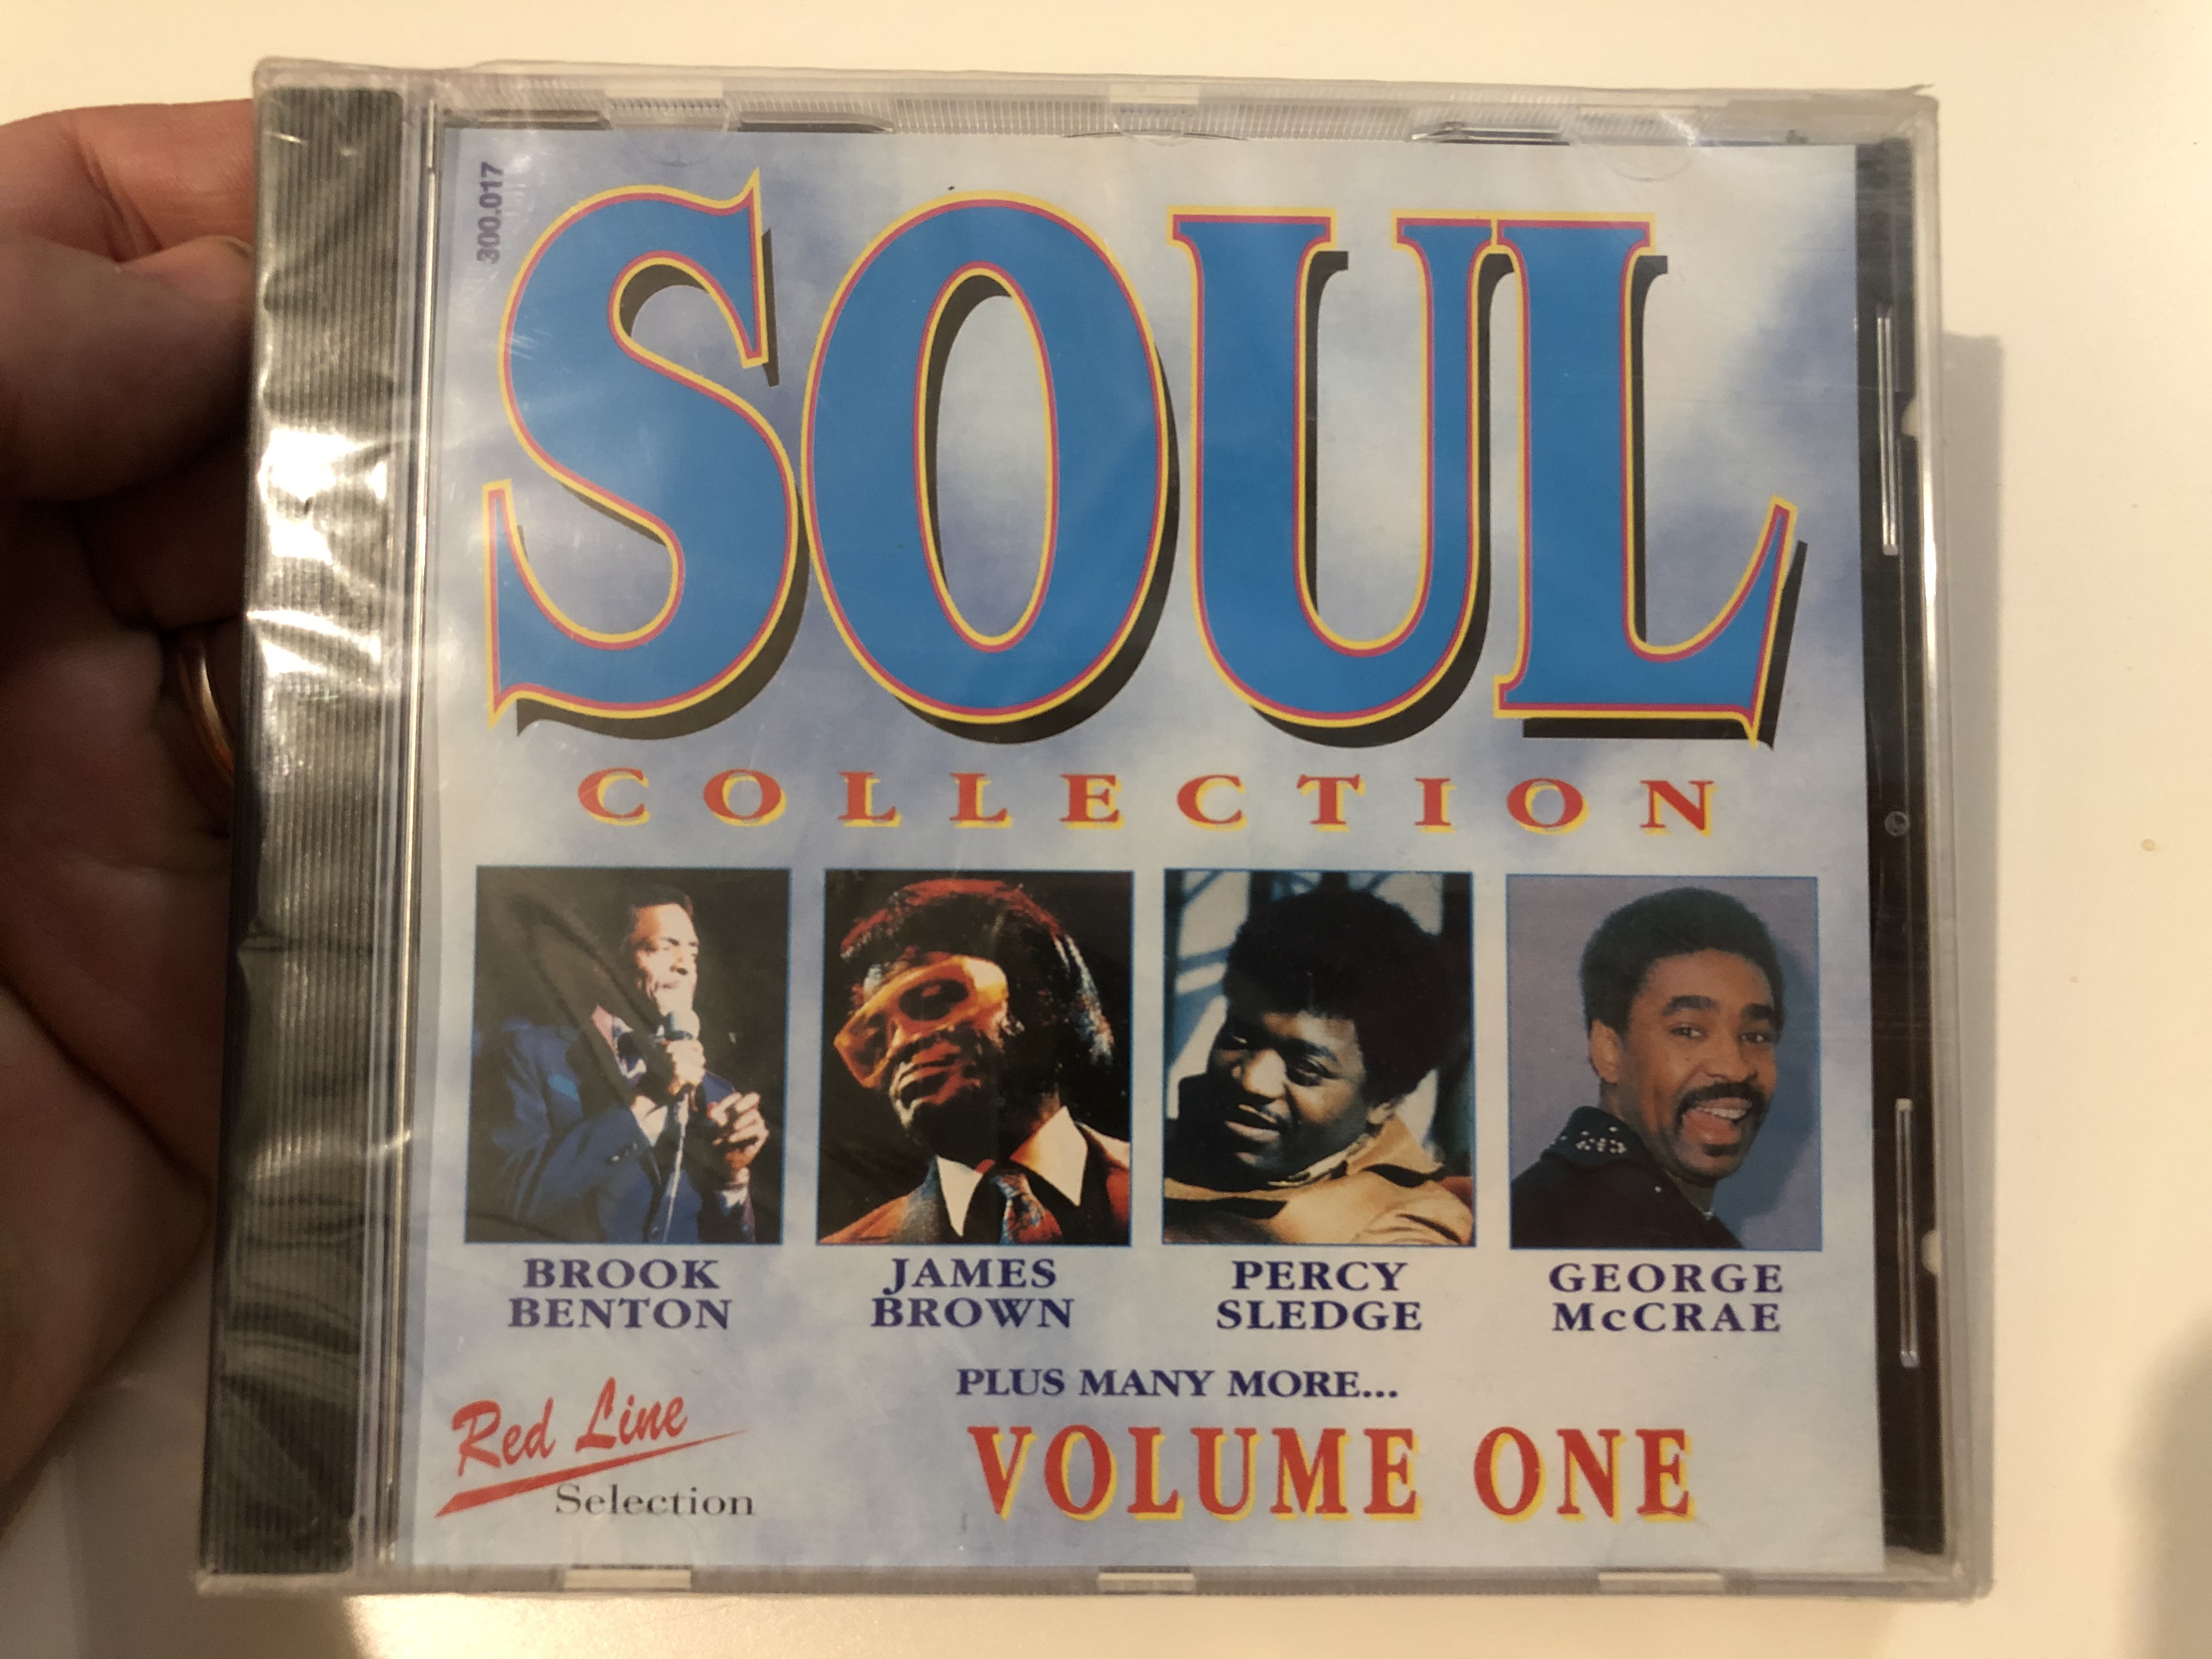 soul-collection-volume-one-brook-benton-james-brown-percy-sledge-george-mccrae-plus-many-more-red-line-selection-audio-cd-300-1-.jpg